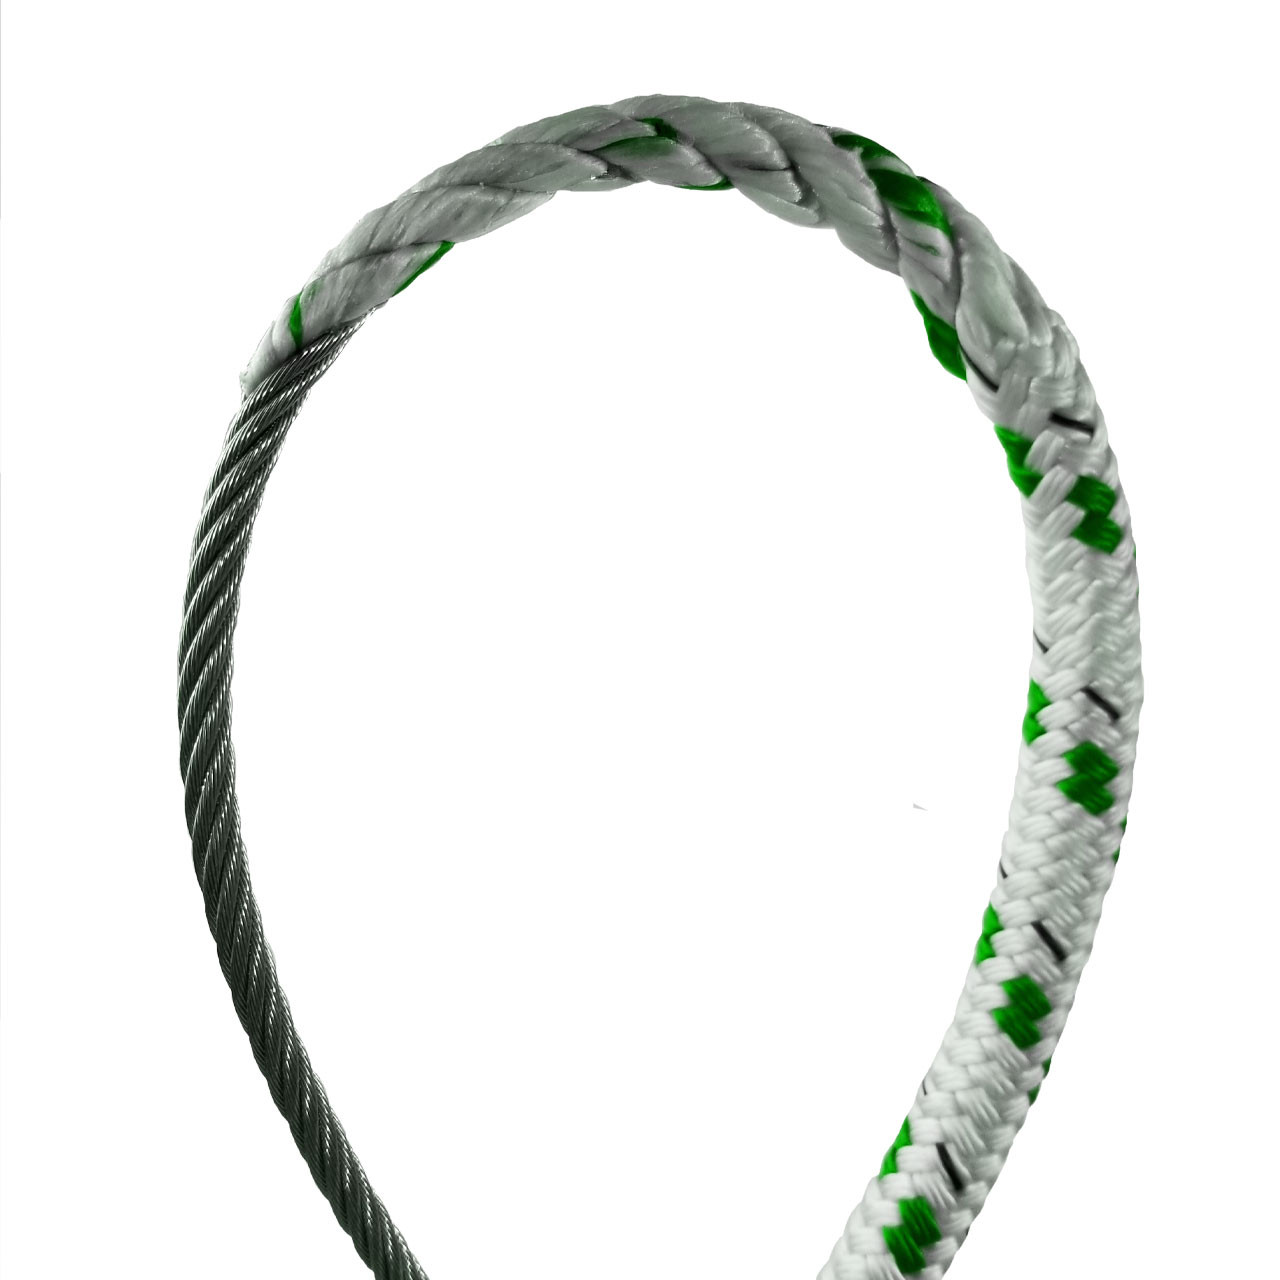 3/8 - Wire-to-Rope Halyard w/ 1/8 Wire Diameter (Green Tracer) by U.S. Rigging